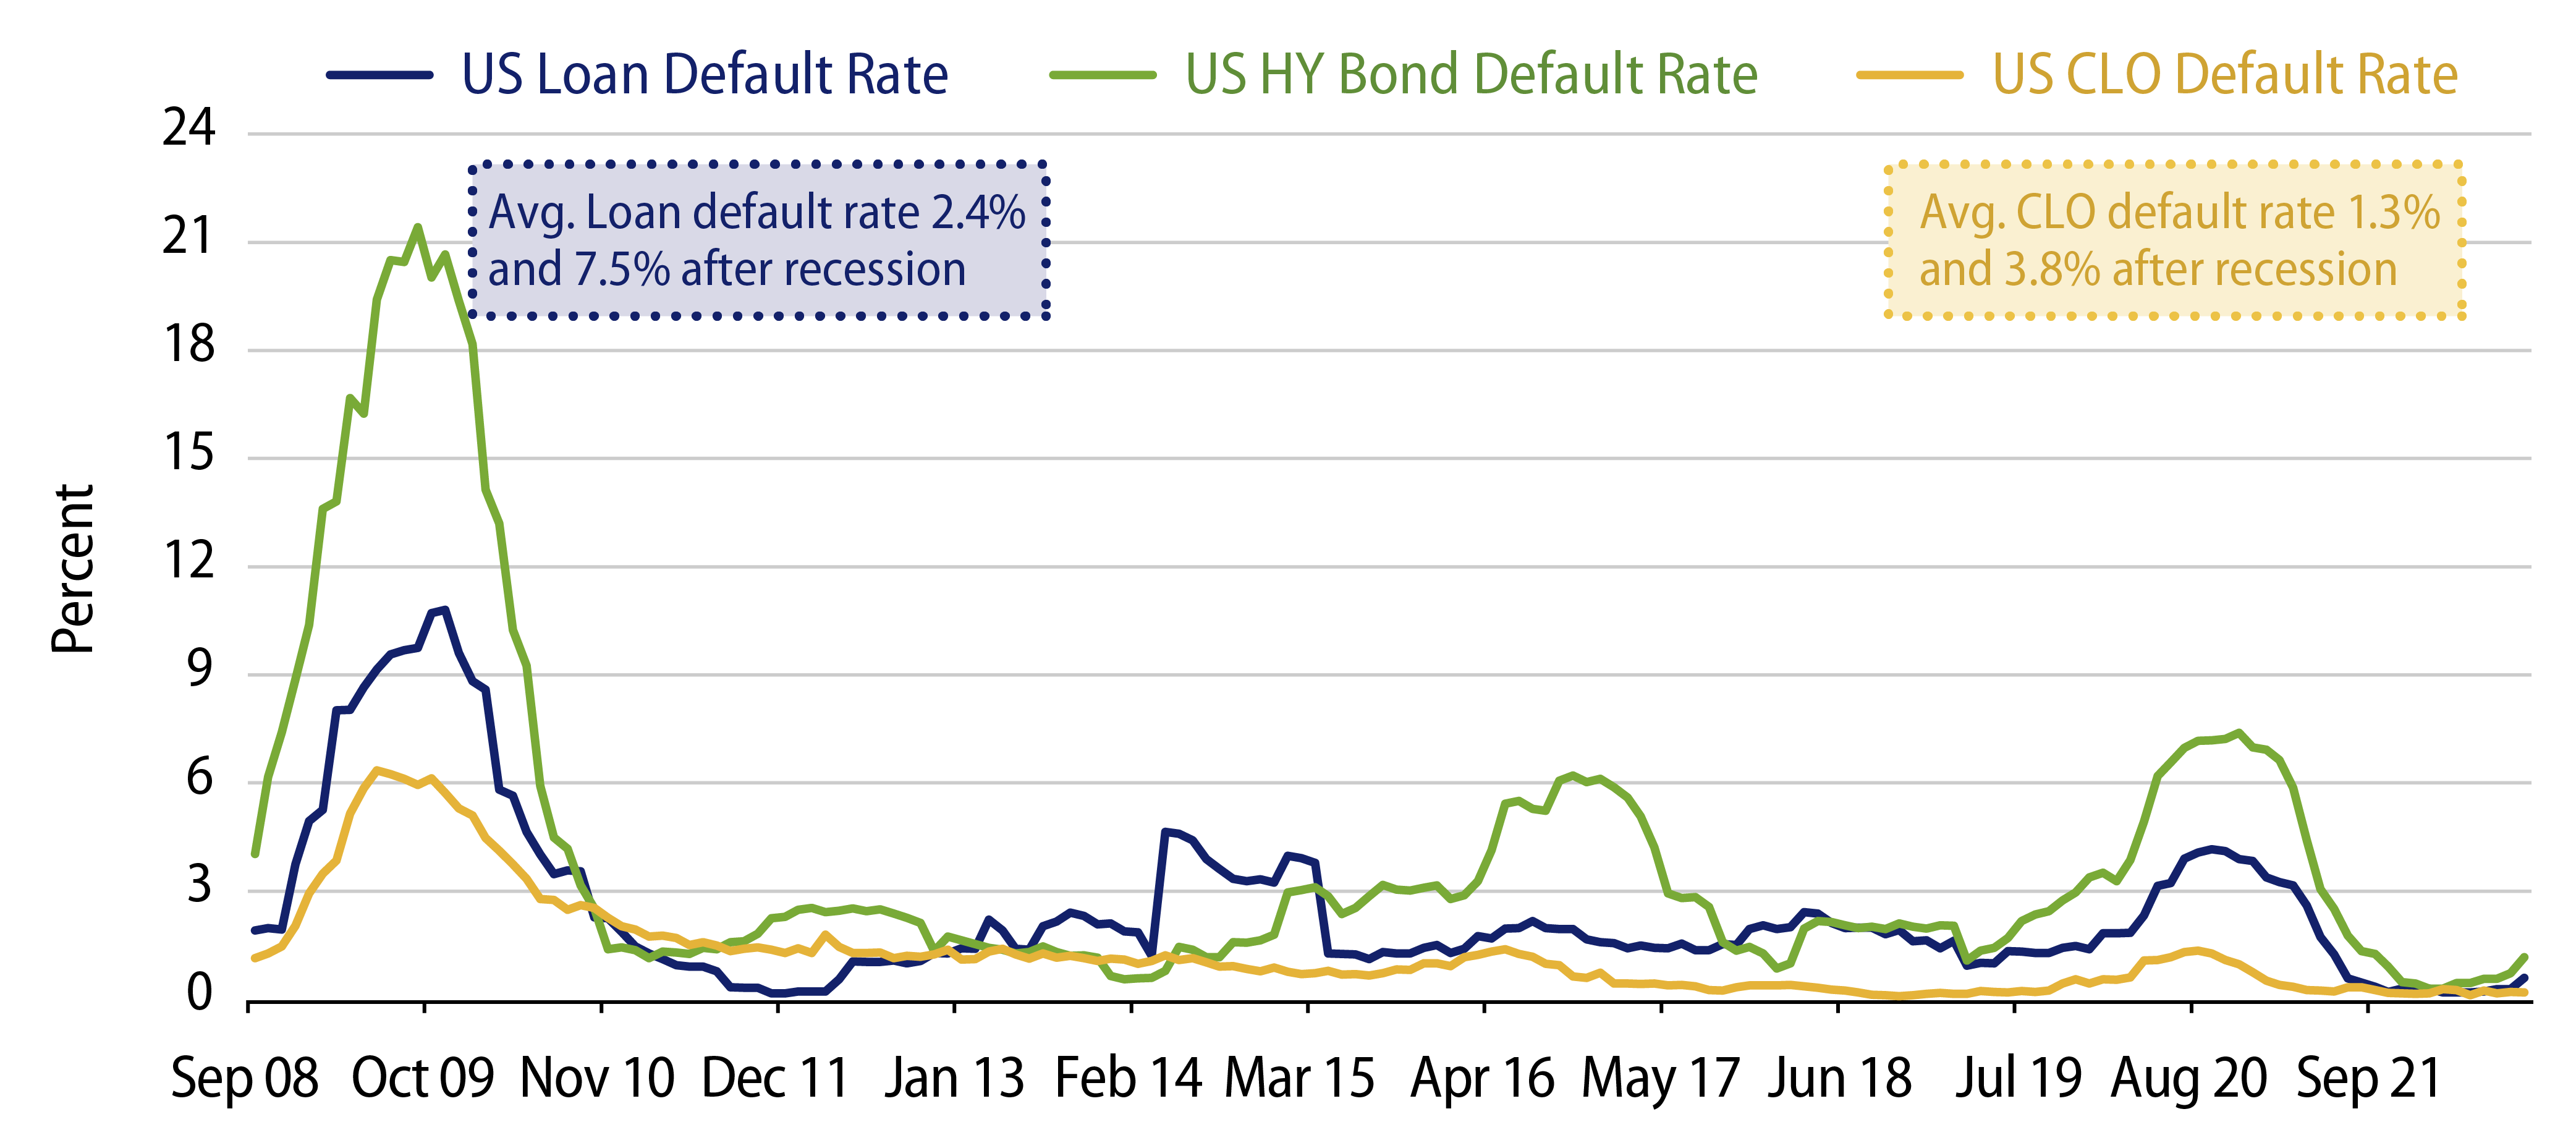 CLO Defaults Historically Are About Half as Frequent as the Bank Loan Market